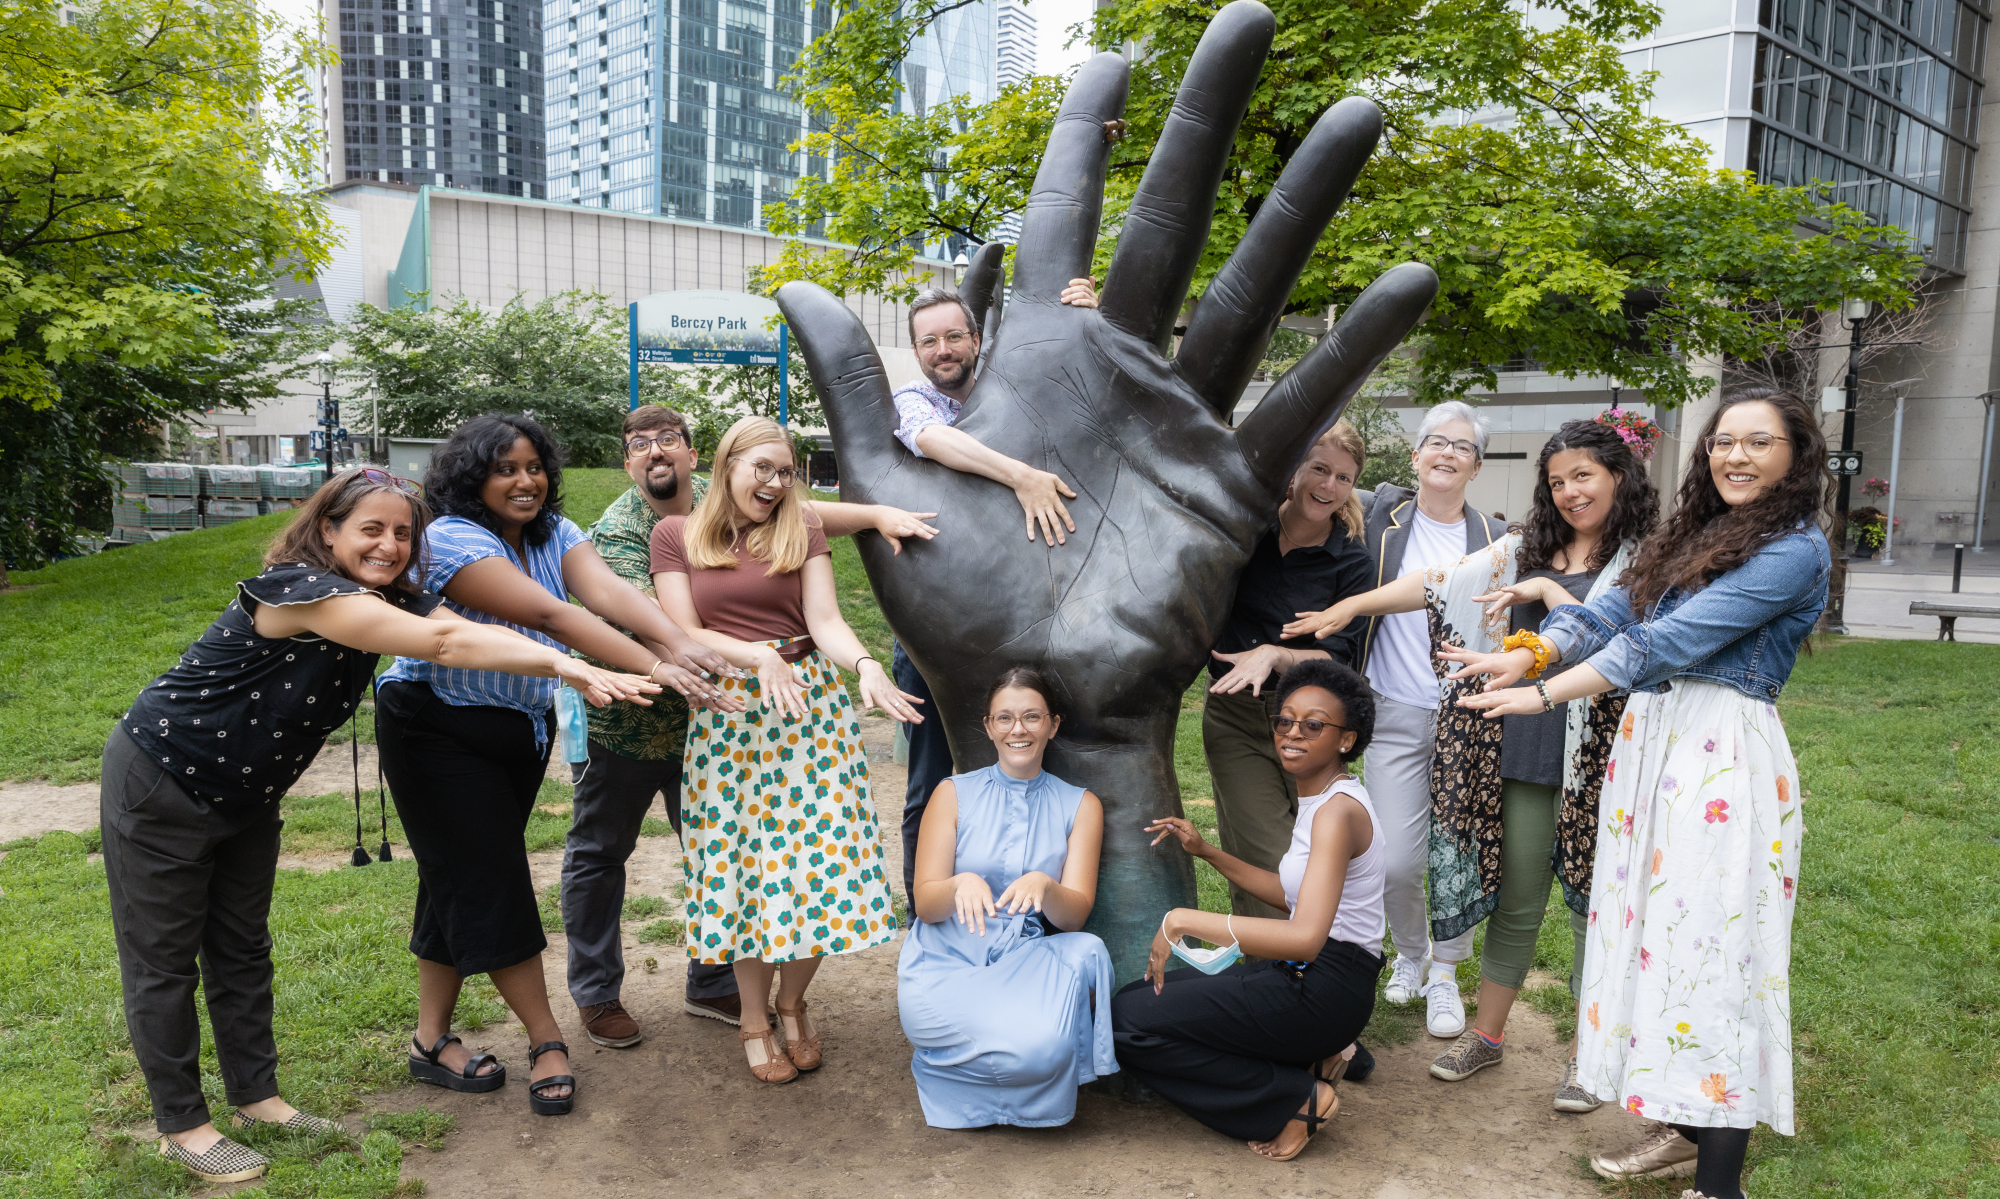 Group of 11 people hold out their hands as they pose around a large hand sculpture in a park.